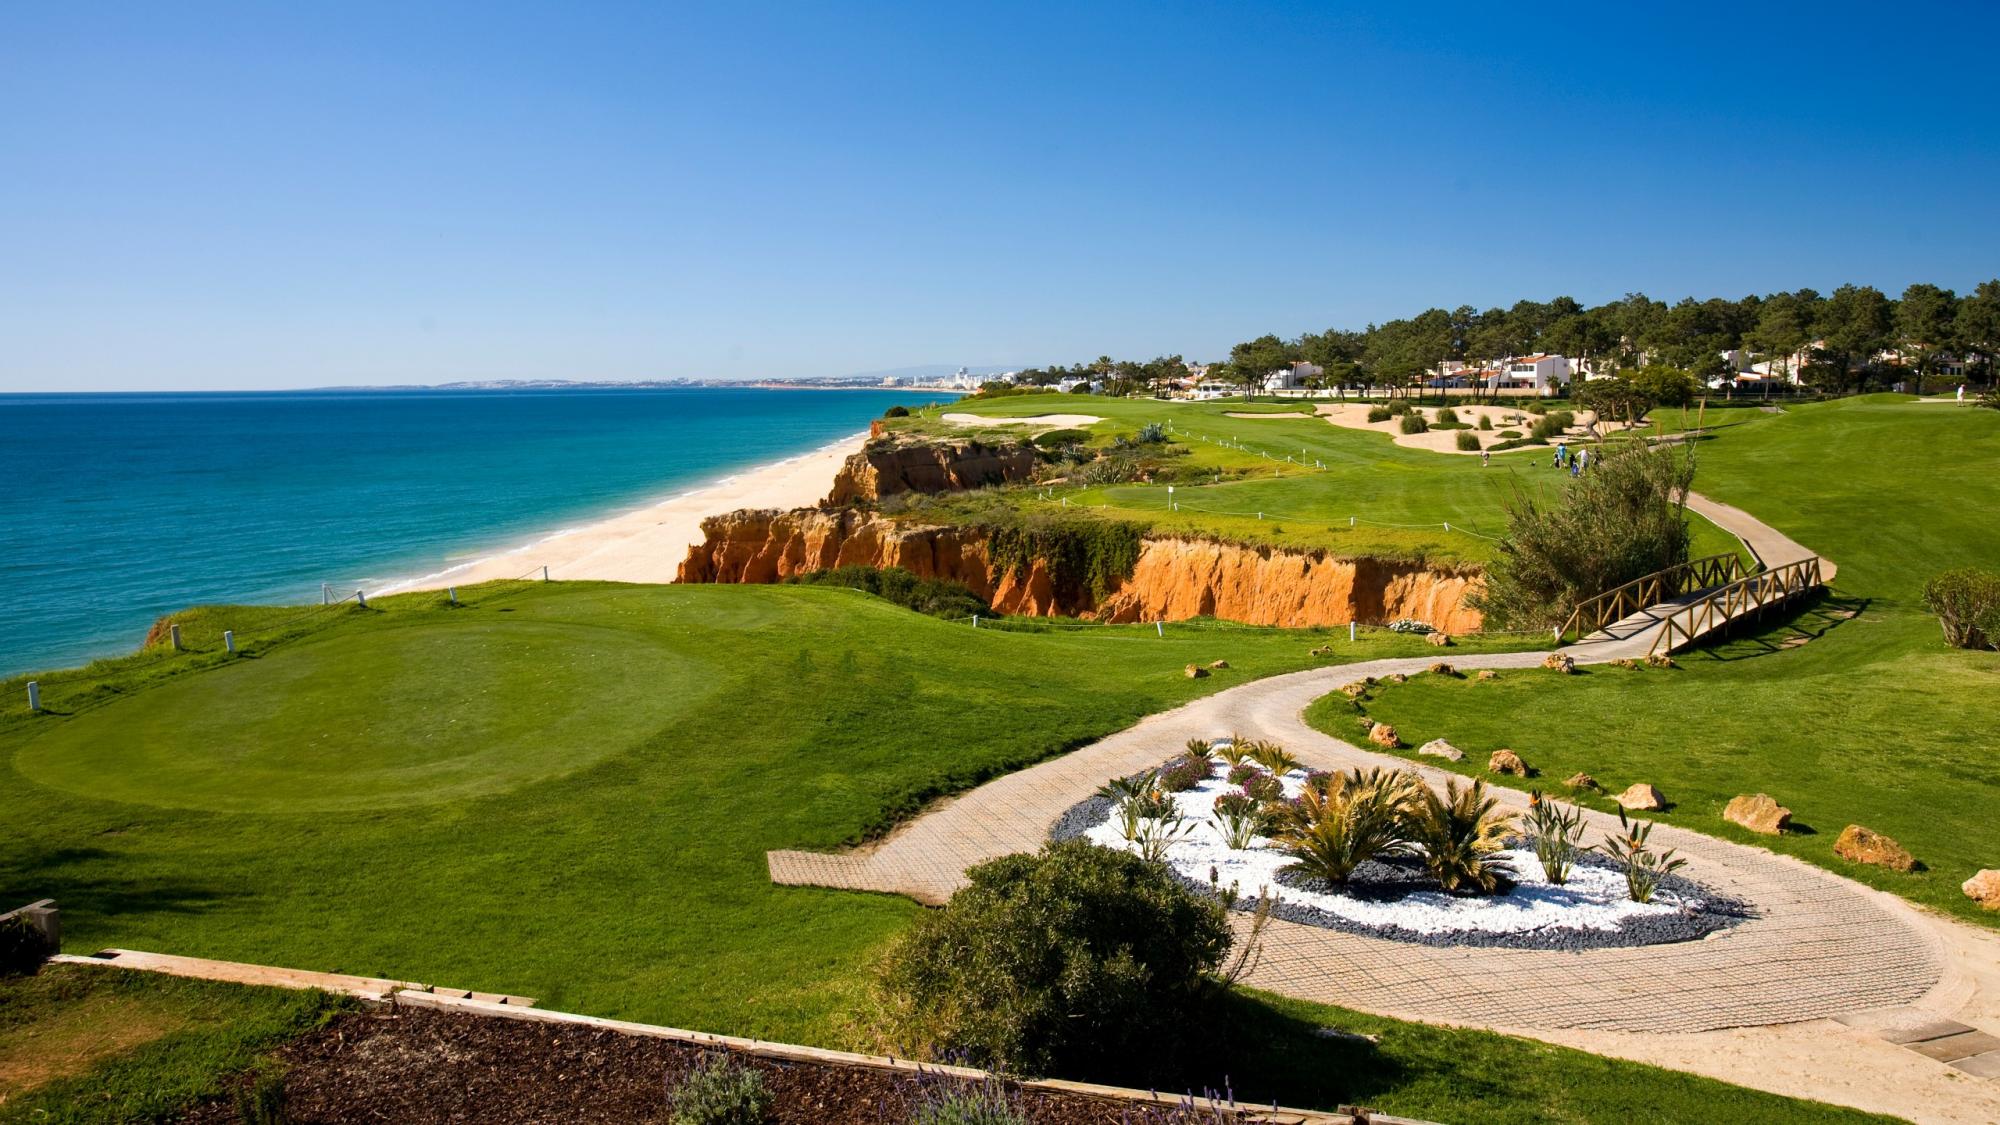 The Vale do Lobo Royal Golf Course's scenic golf course situated in gorgeous Algarve.